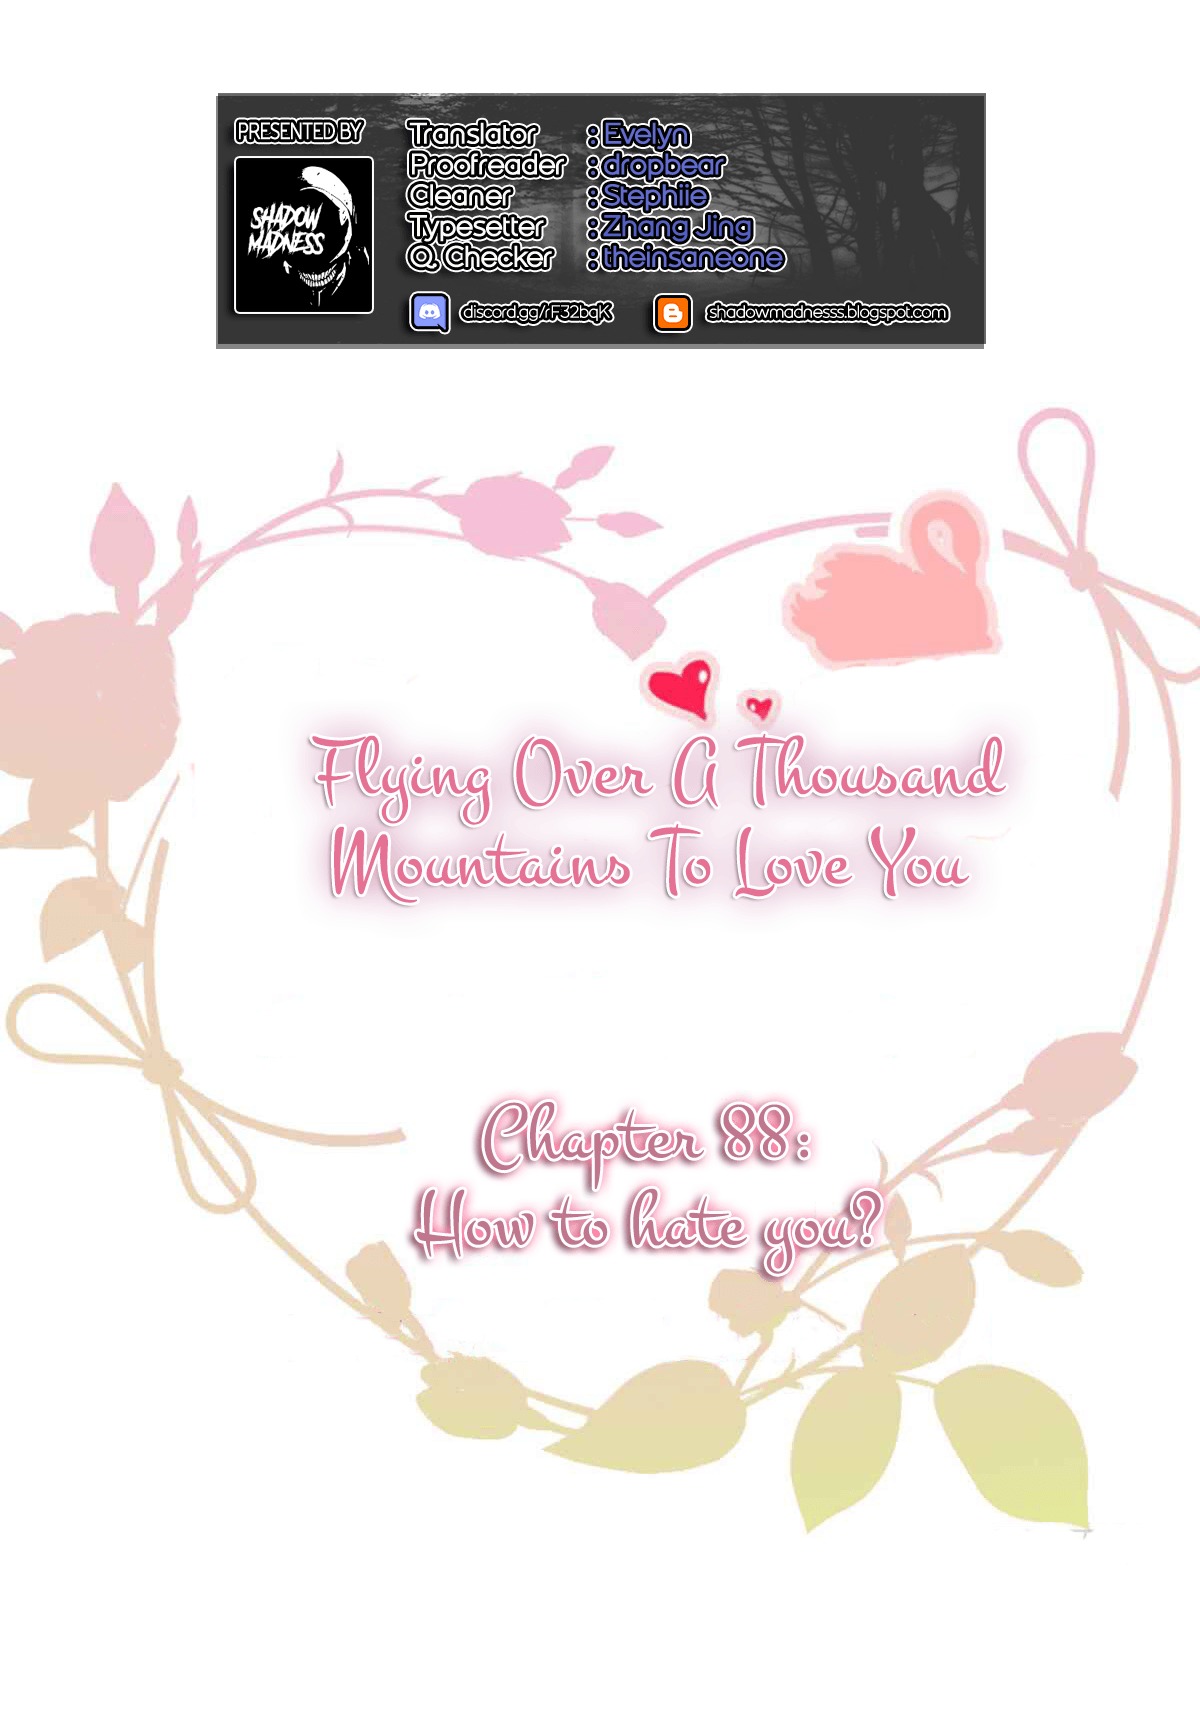 Flying Over a Thousand Mountains to Love You ch.88